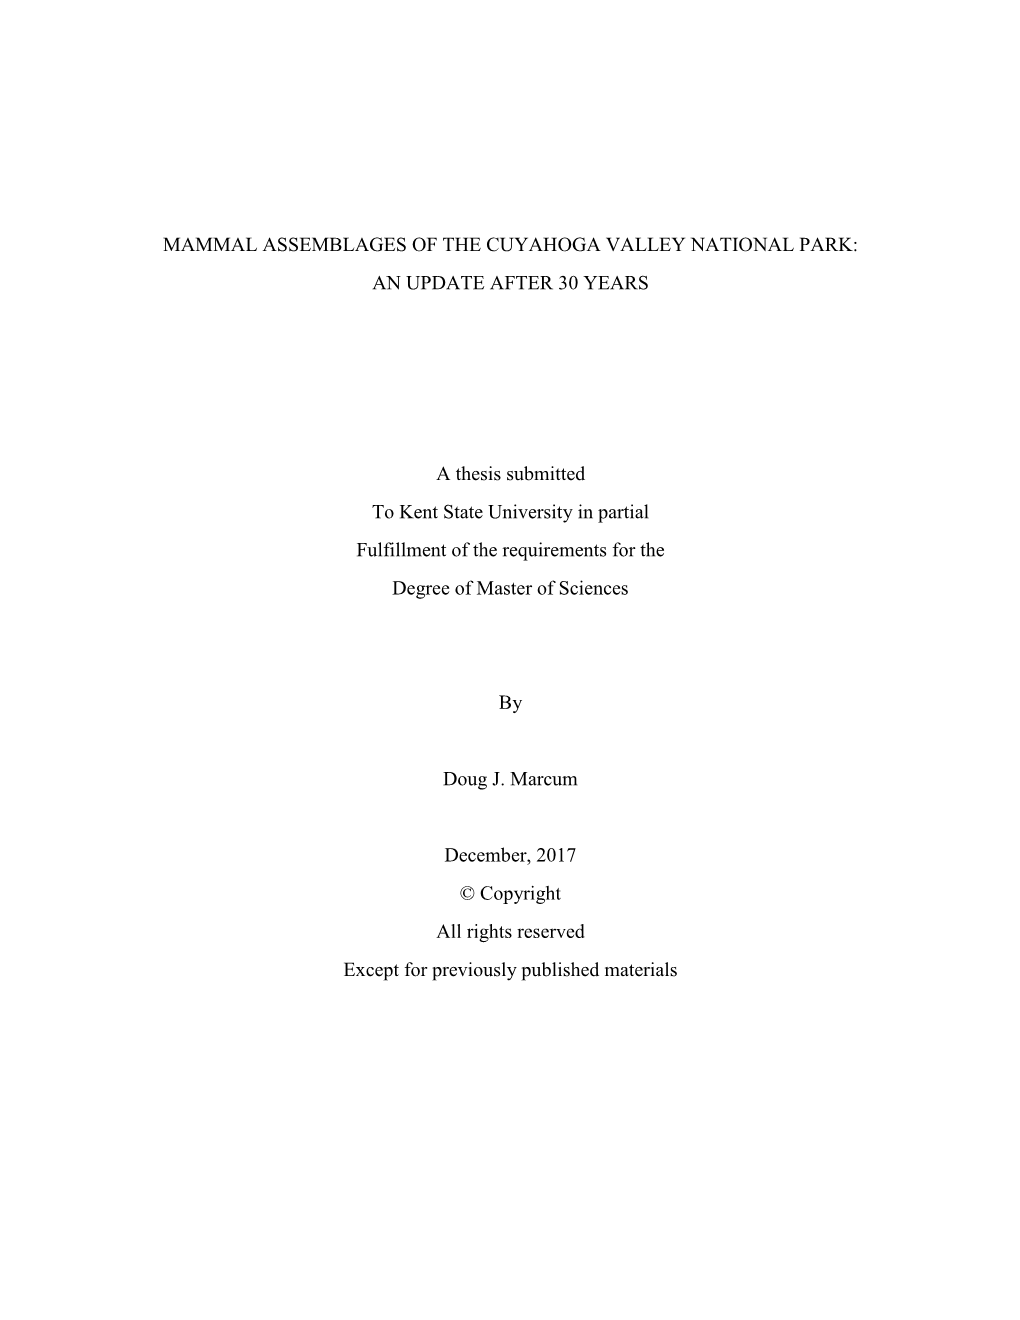 MAMMAL ASSEMBLAGES of the CUYAHOGA VALLEY NATIONAL PARK: an UPDATE AFTER 30 YEARS a Thesis Submitted to Kent State University I